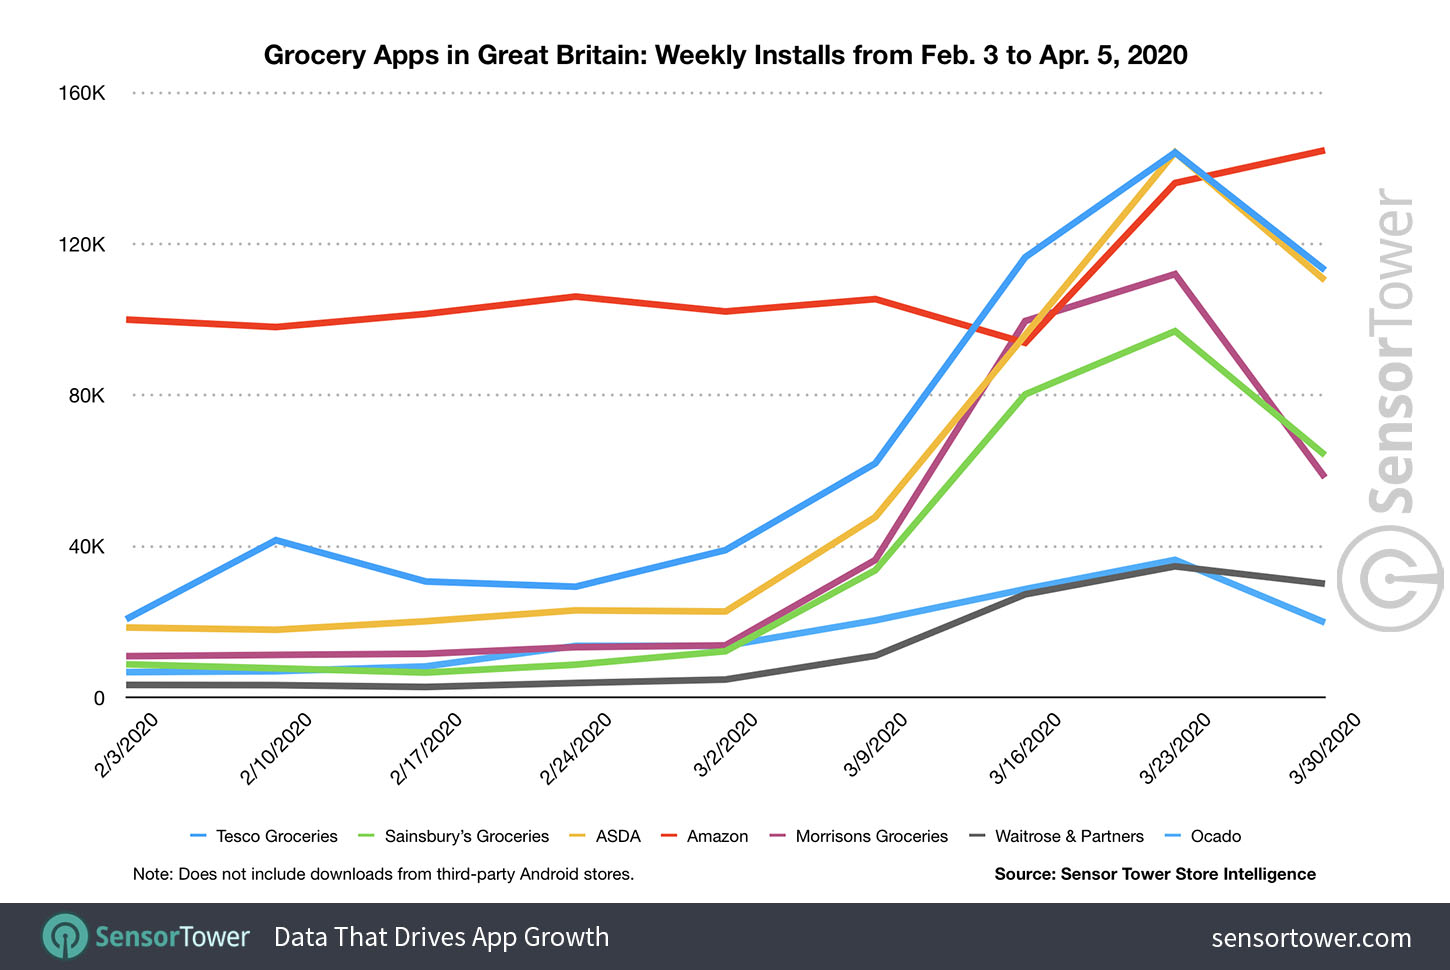 Weekly Installs for Grocery Apps in Great Britain from February 3 to April 5 2020